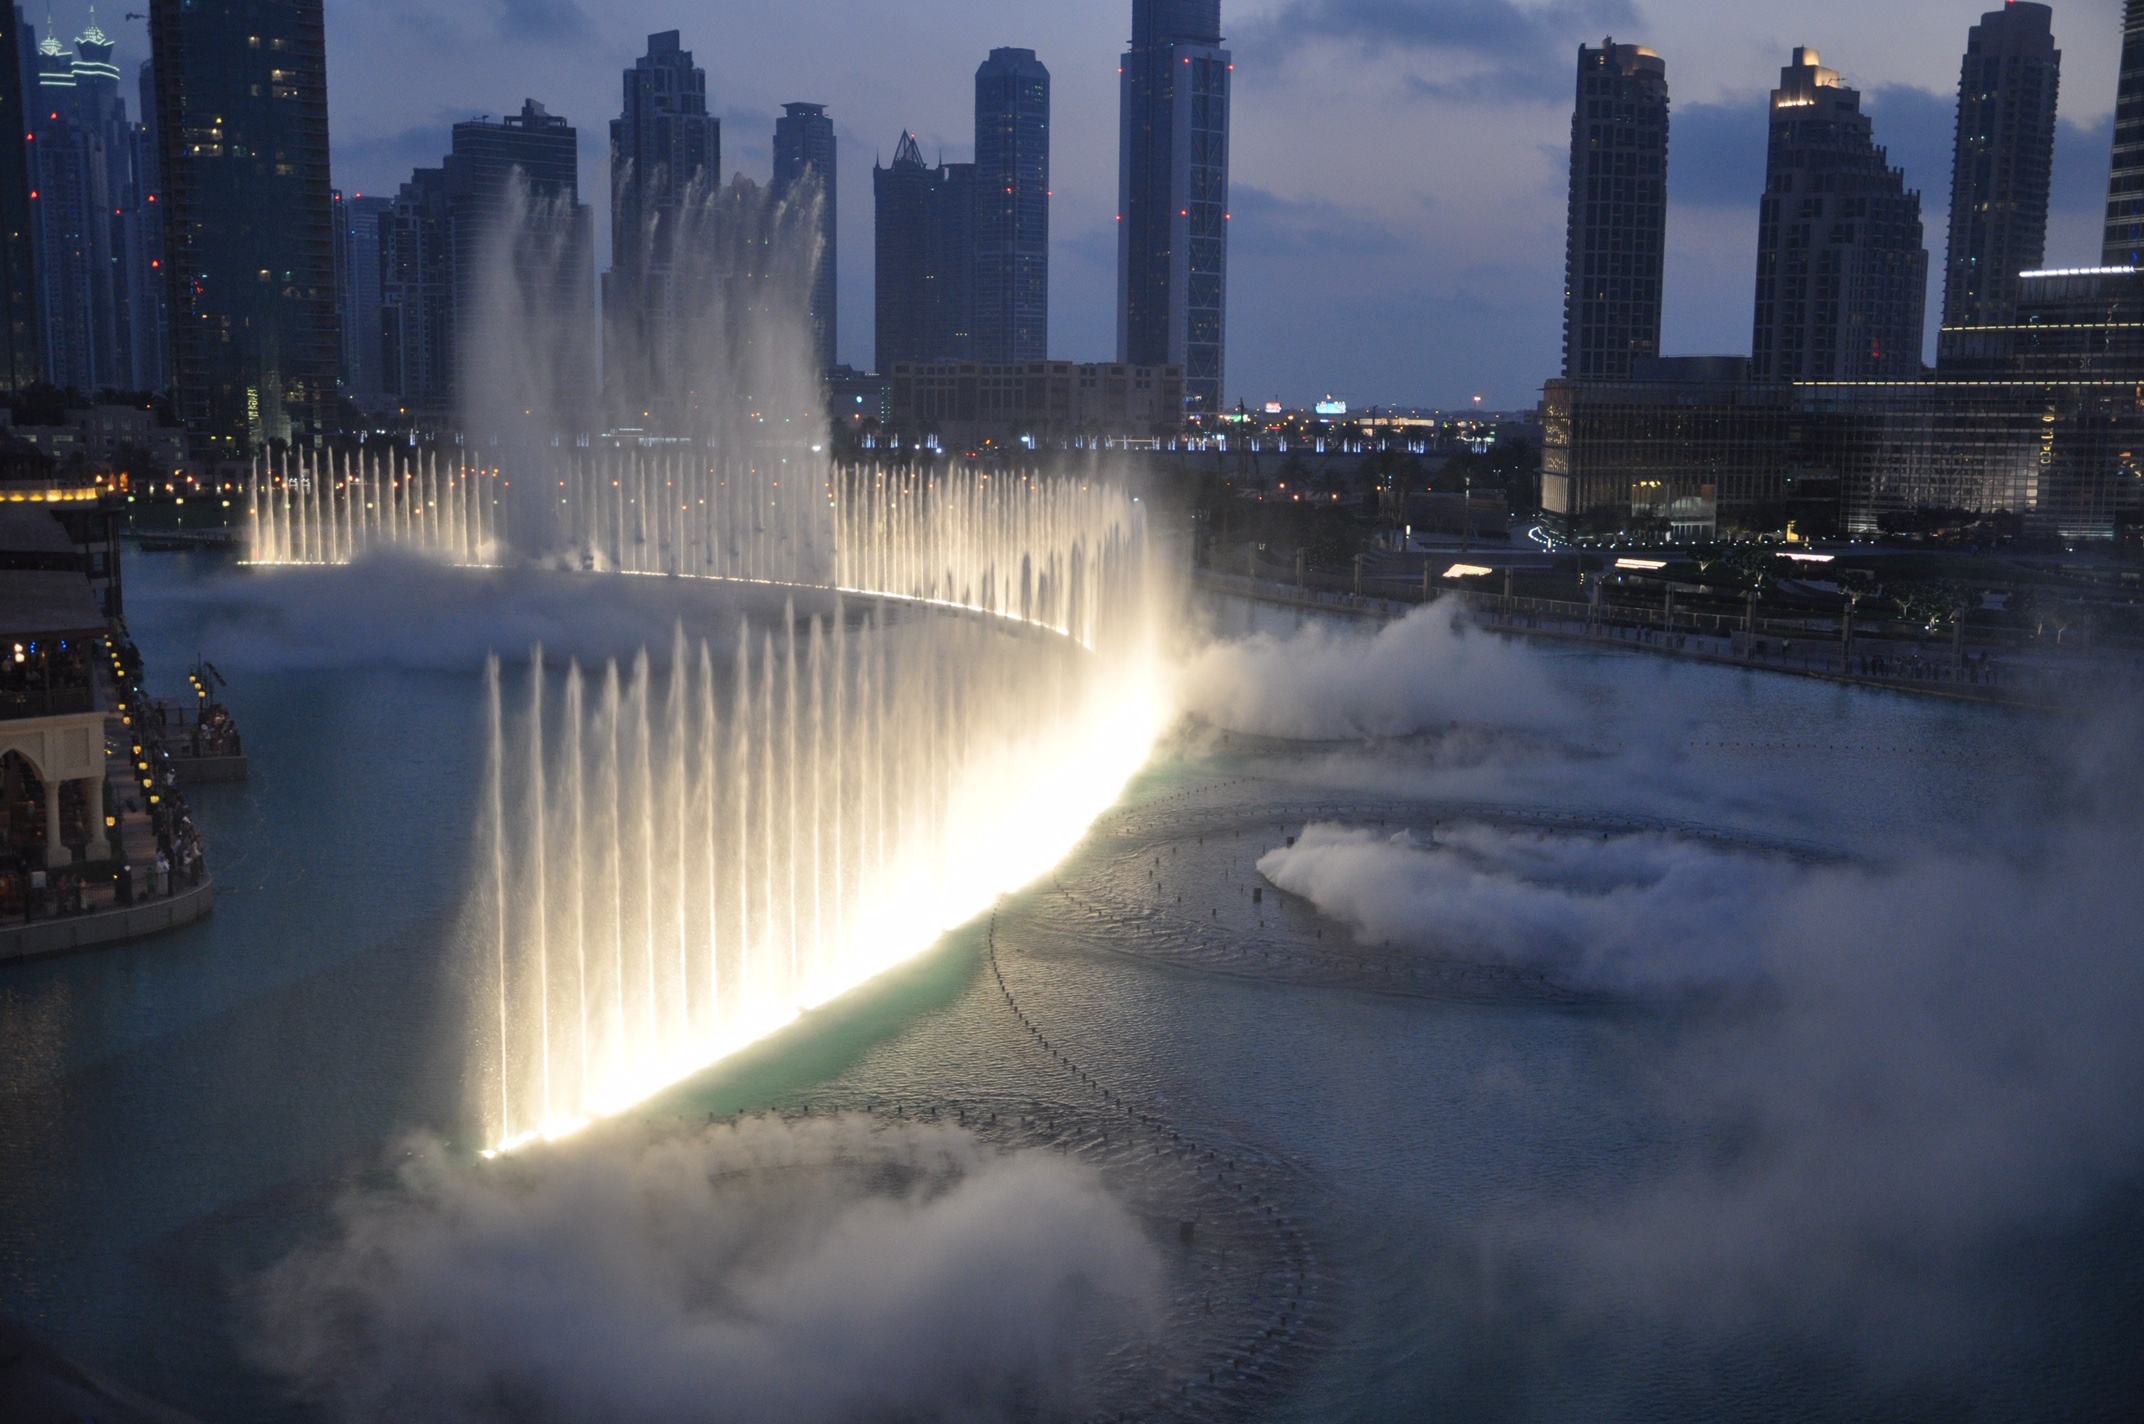 The Dubai Fountains dancing water show is among the most beautiful in the city. On the artificial lake in the midst of the Downtown neighborhood, music heralds the beginning of the show that takes place between Burj Khalifa, Dubai Mall, Palace Downtown Hotel and Souk Al Bahar